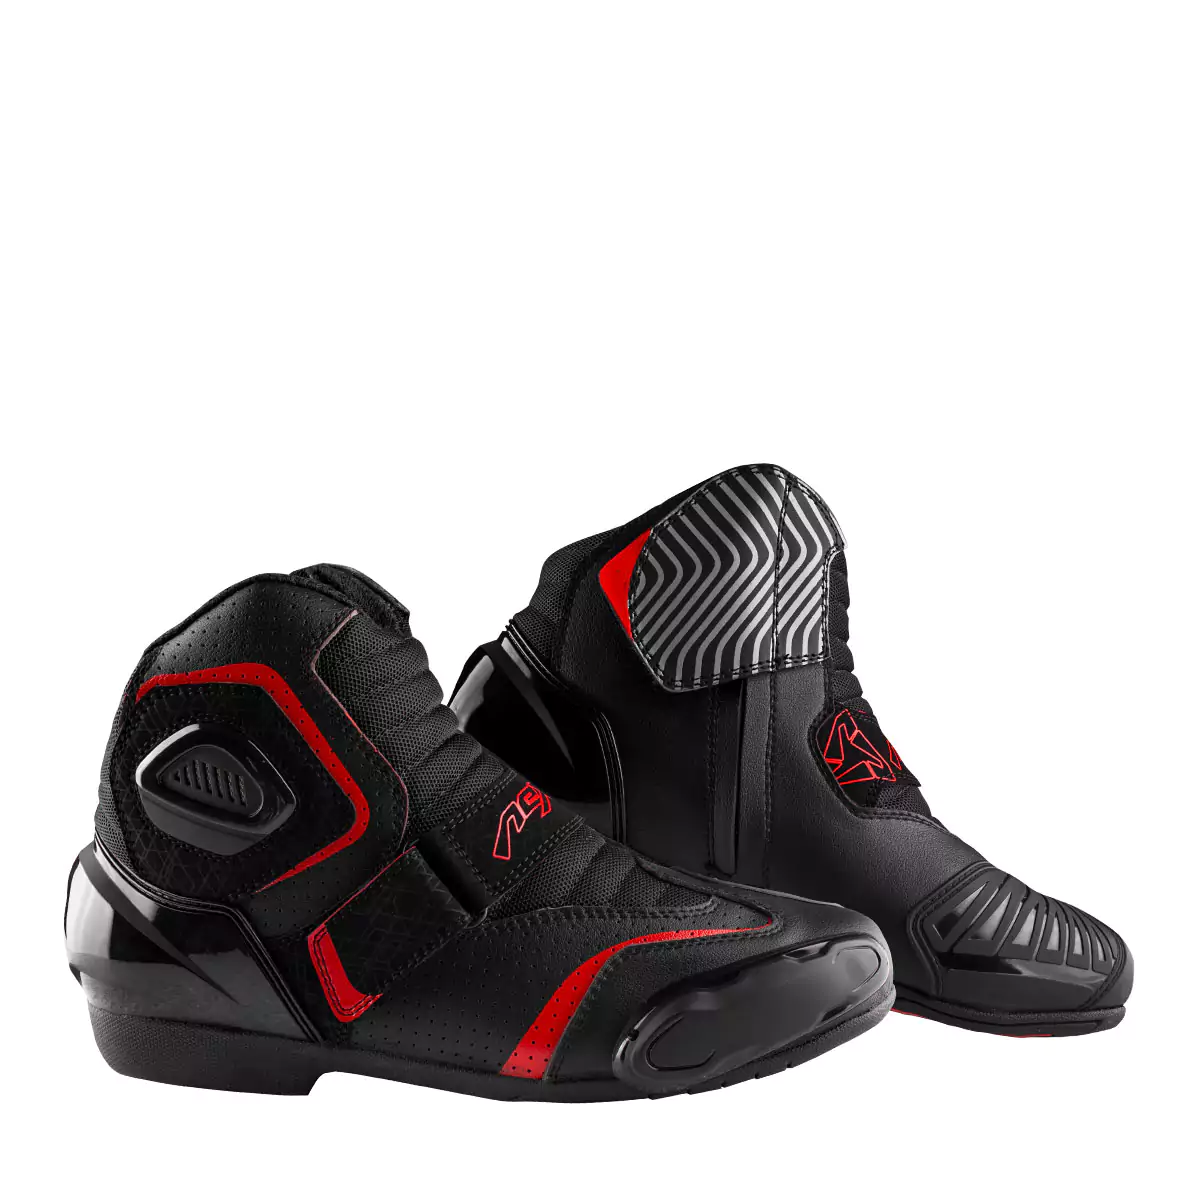 a pair of fully black with little touch of red short motorcycle racing boots